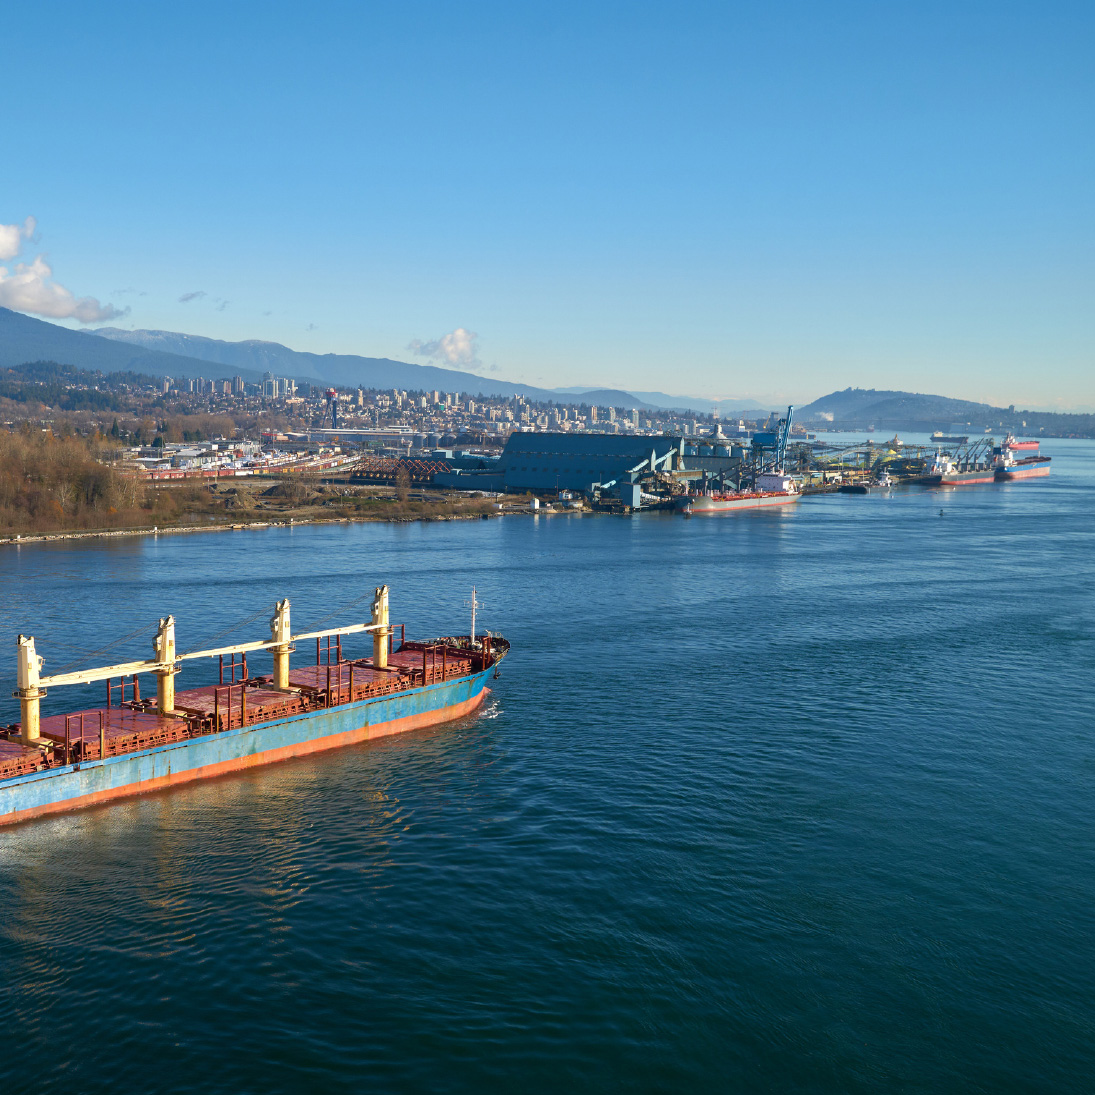 approaching the Port of Vancouver